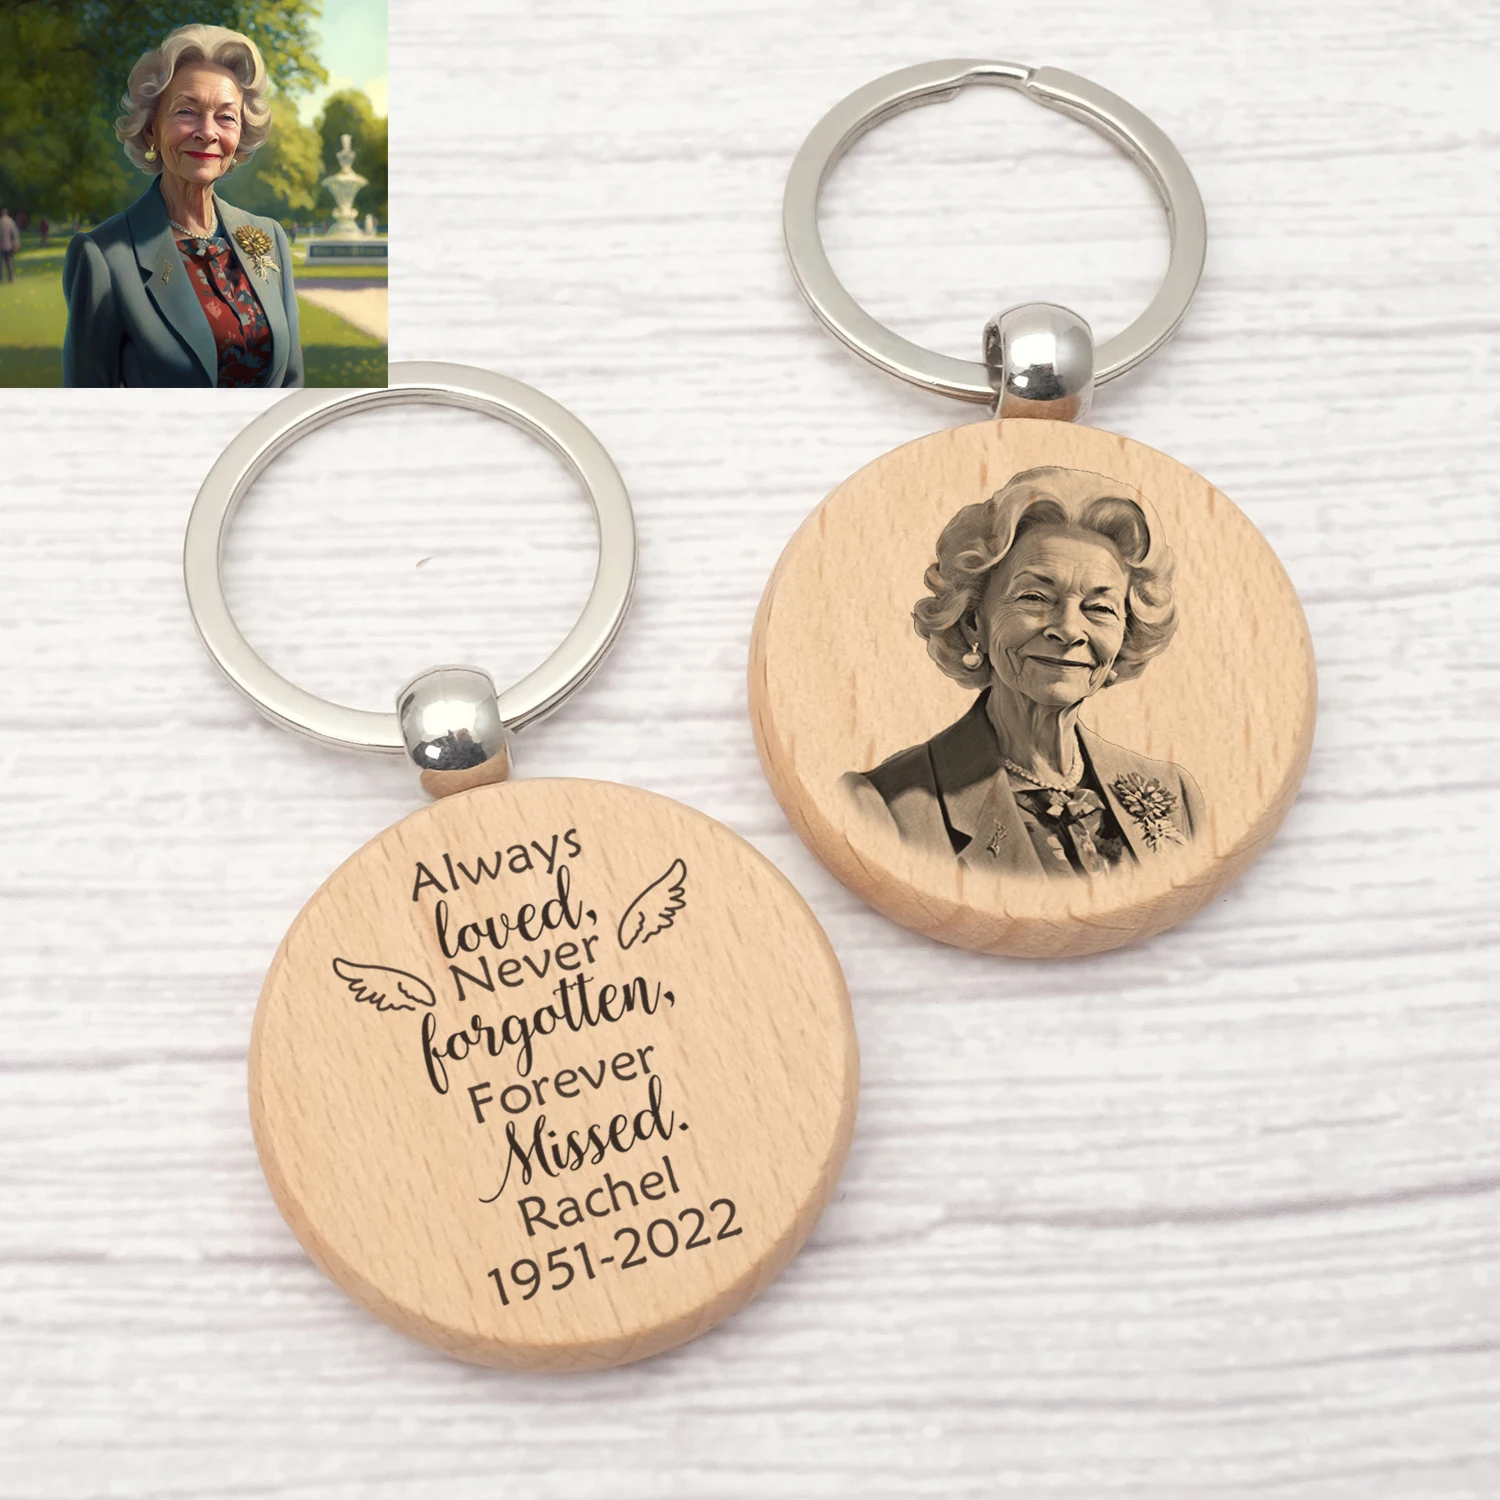 Custom Memorial Keychain Personalized Photo Key Ring Engraved Your Text Sympathy Gifts for Loss of Loved One Family Friends Gift 100pcs free shipping logo wedding stickers personalised add your text custom invitations favors business white labels 3 5cm